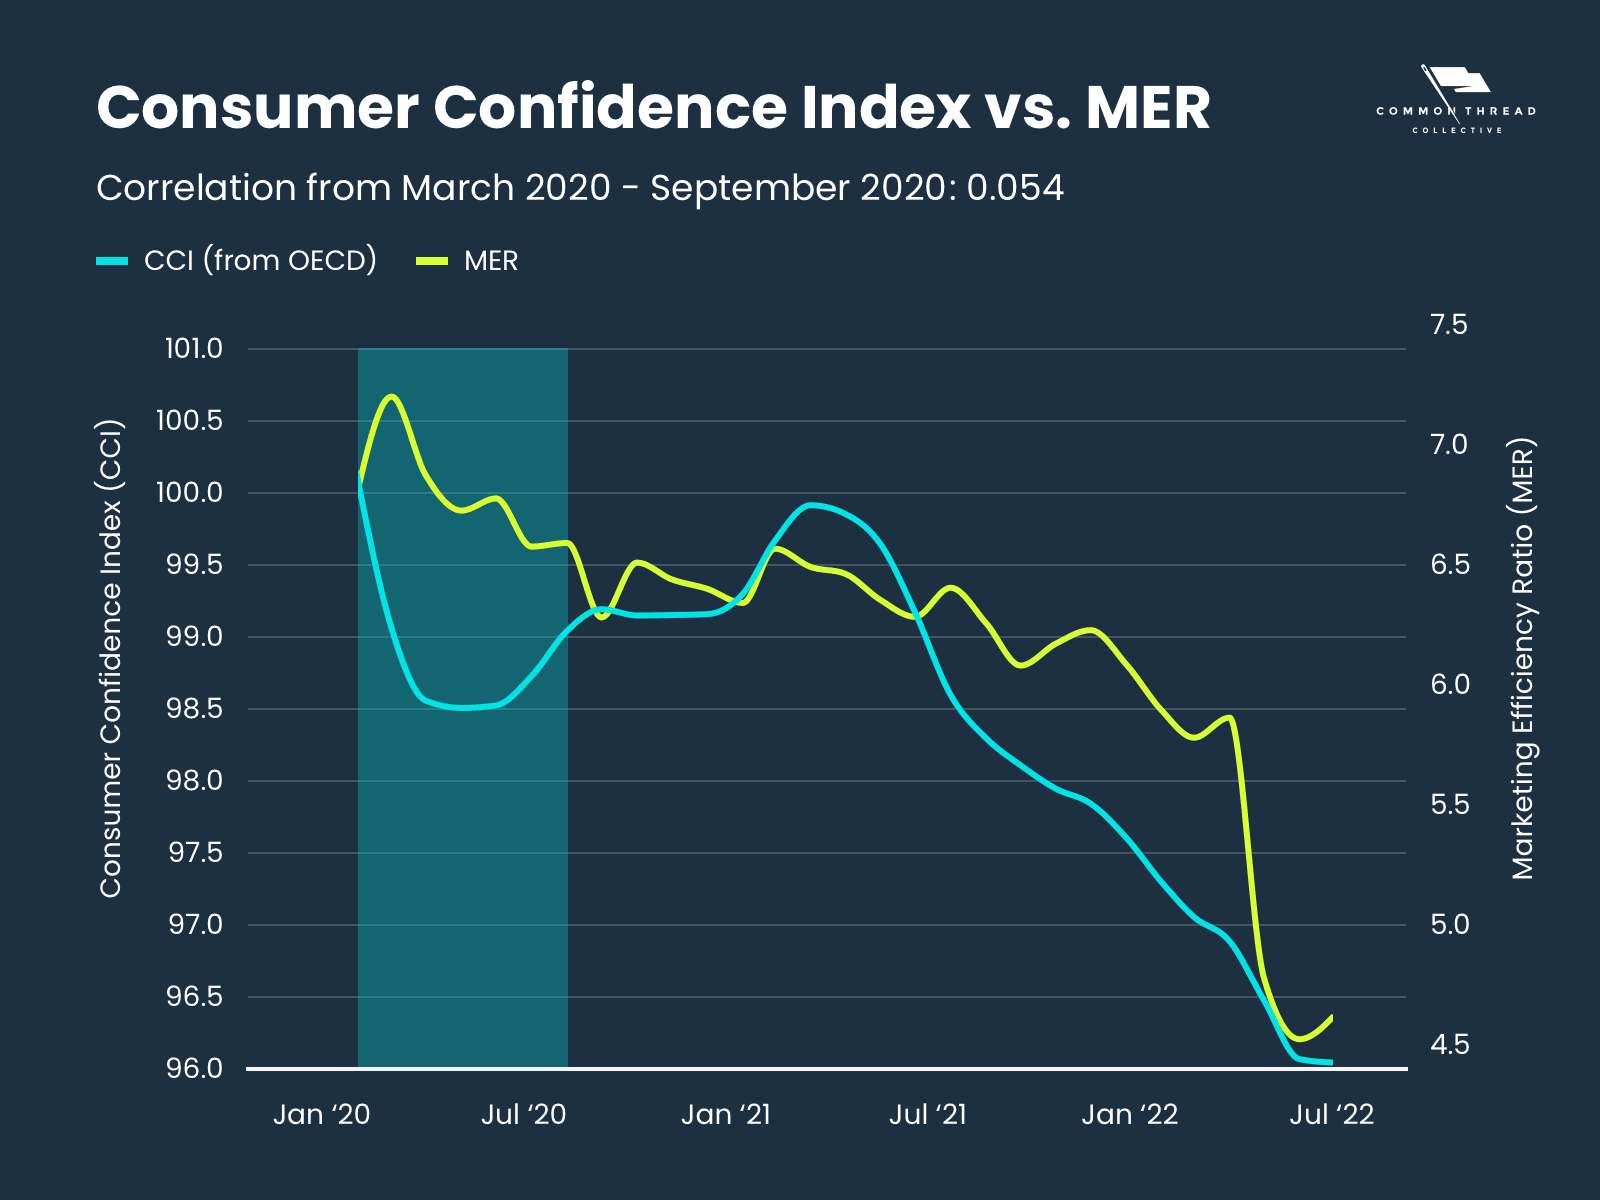 consumer confidence index vs. MER correlation from March 2020 - September 2020: 0.054